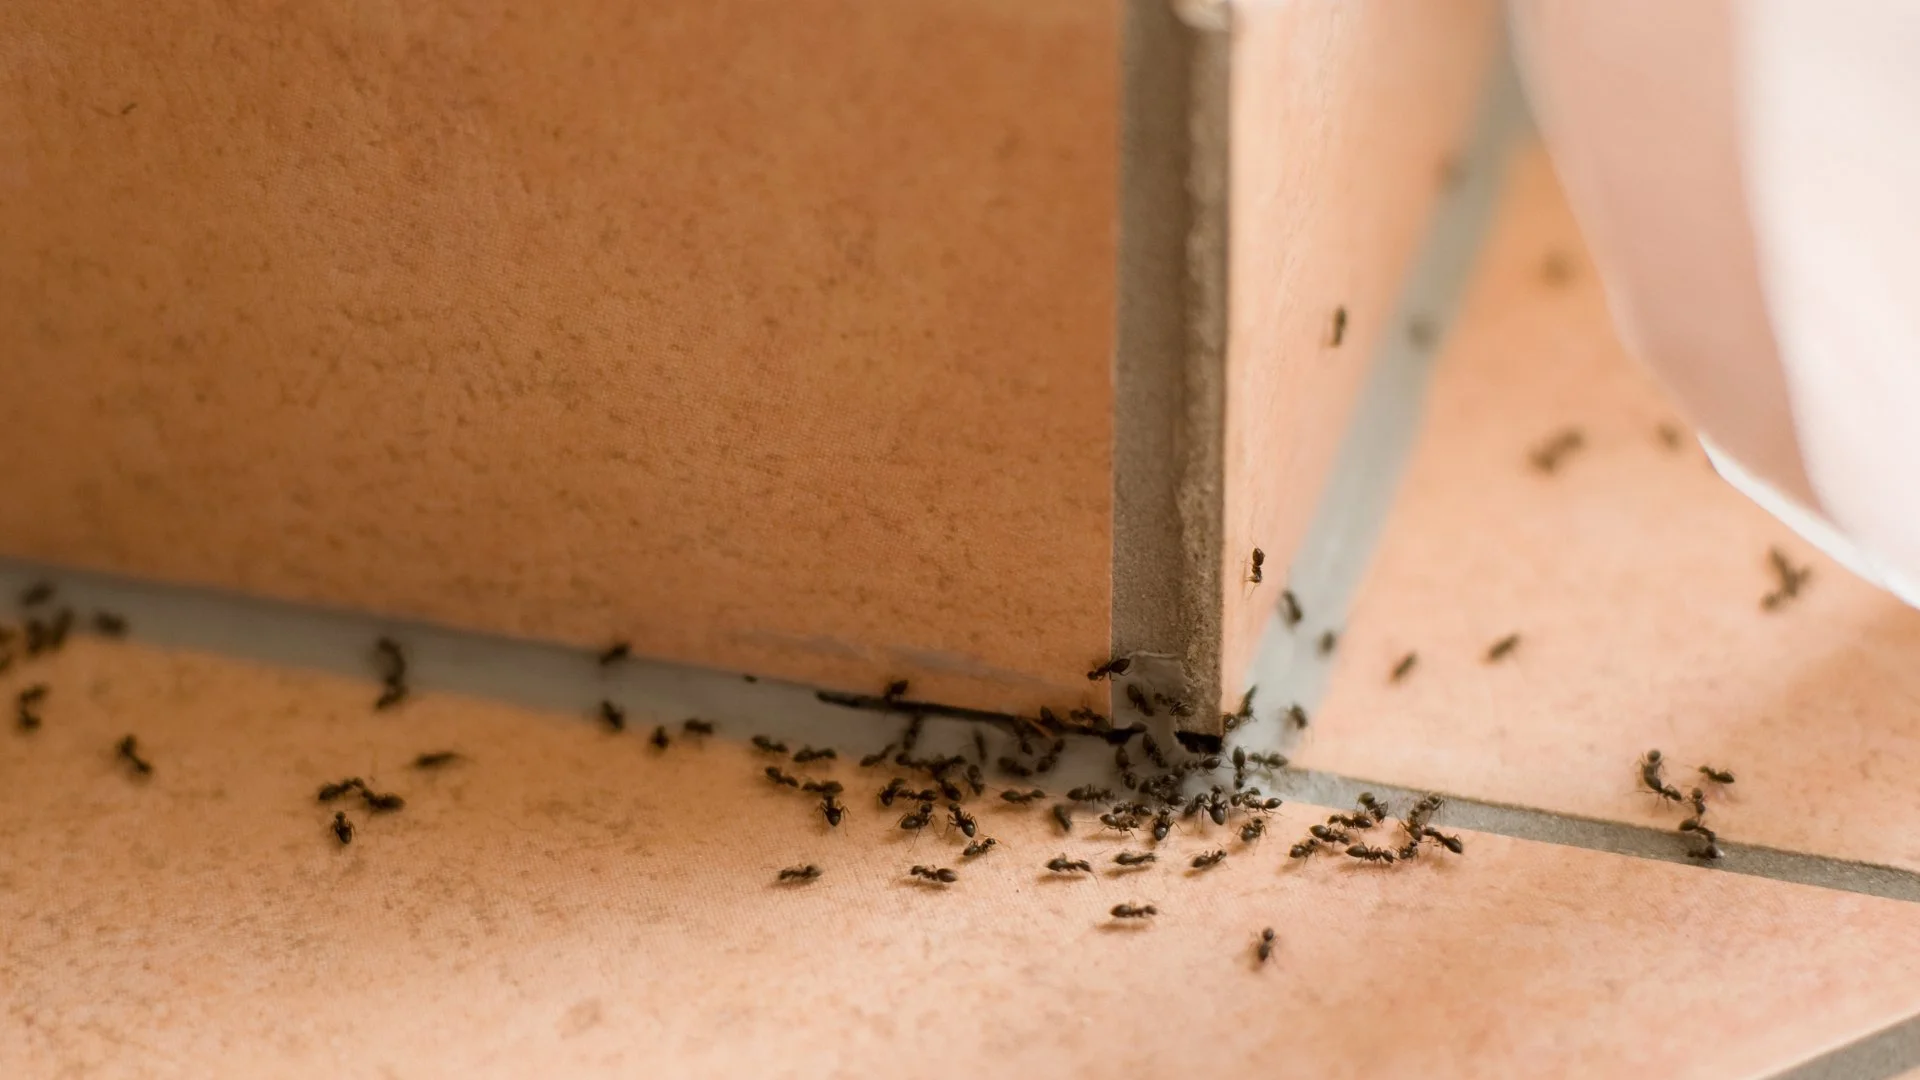 Want to Keep Pests From Invading Your Inside Space? Here's What to Do